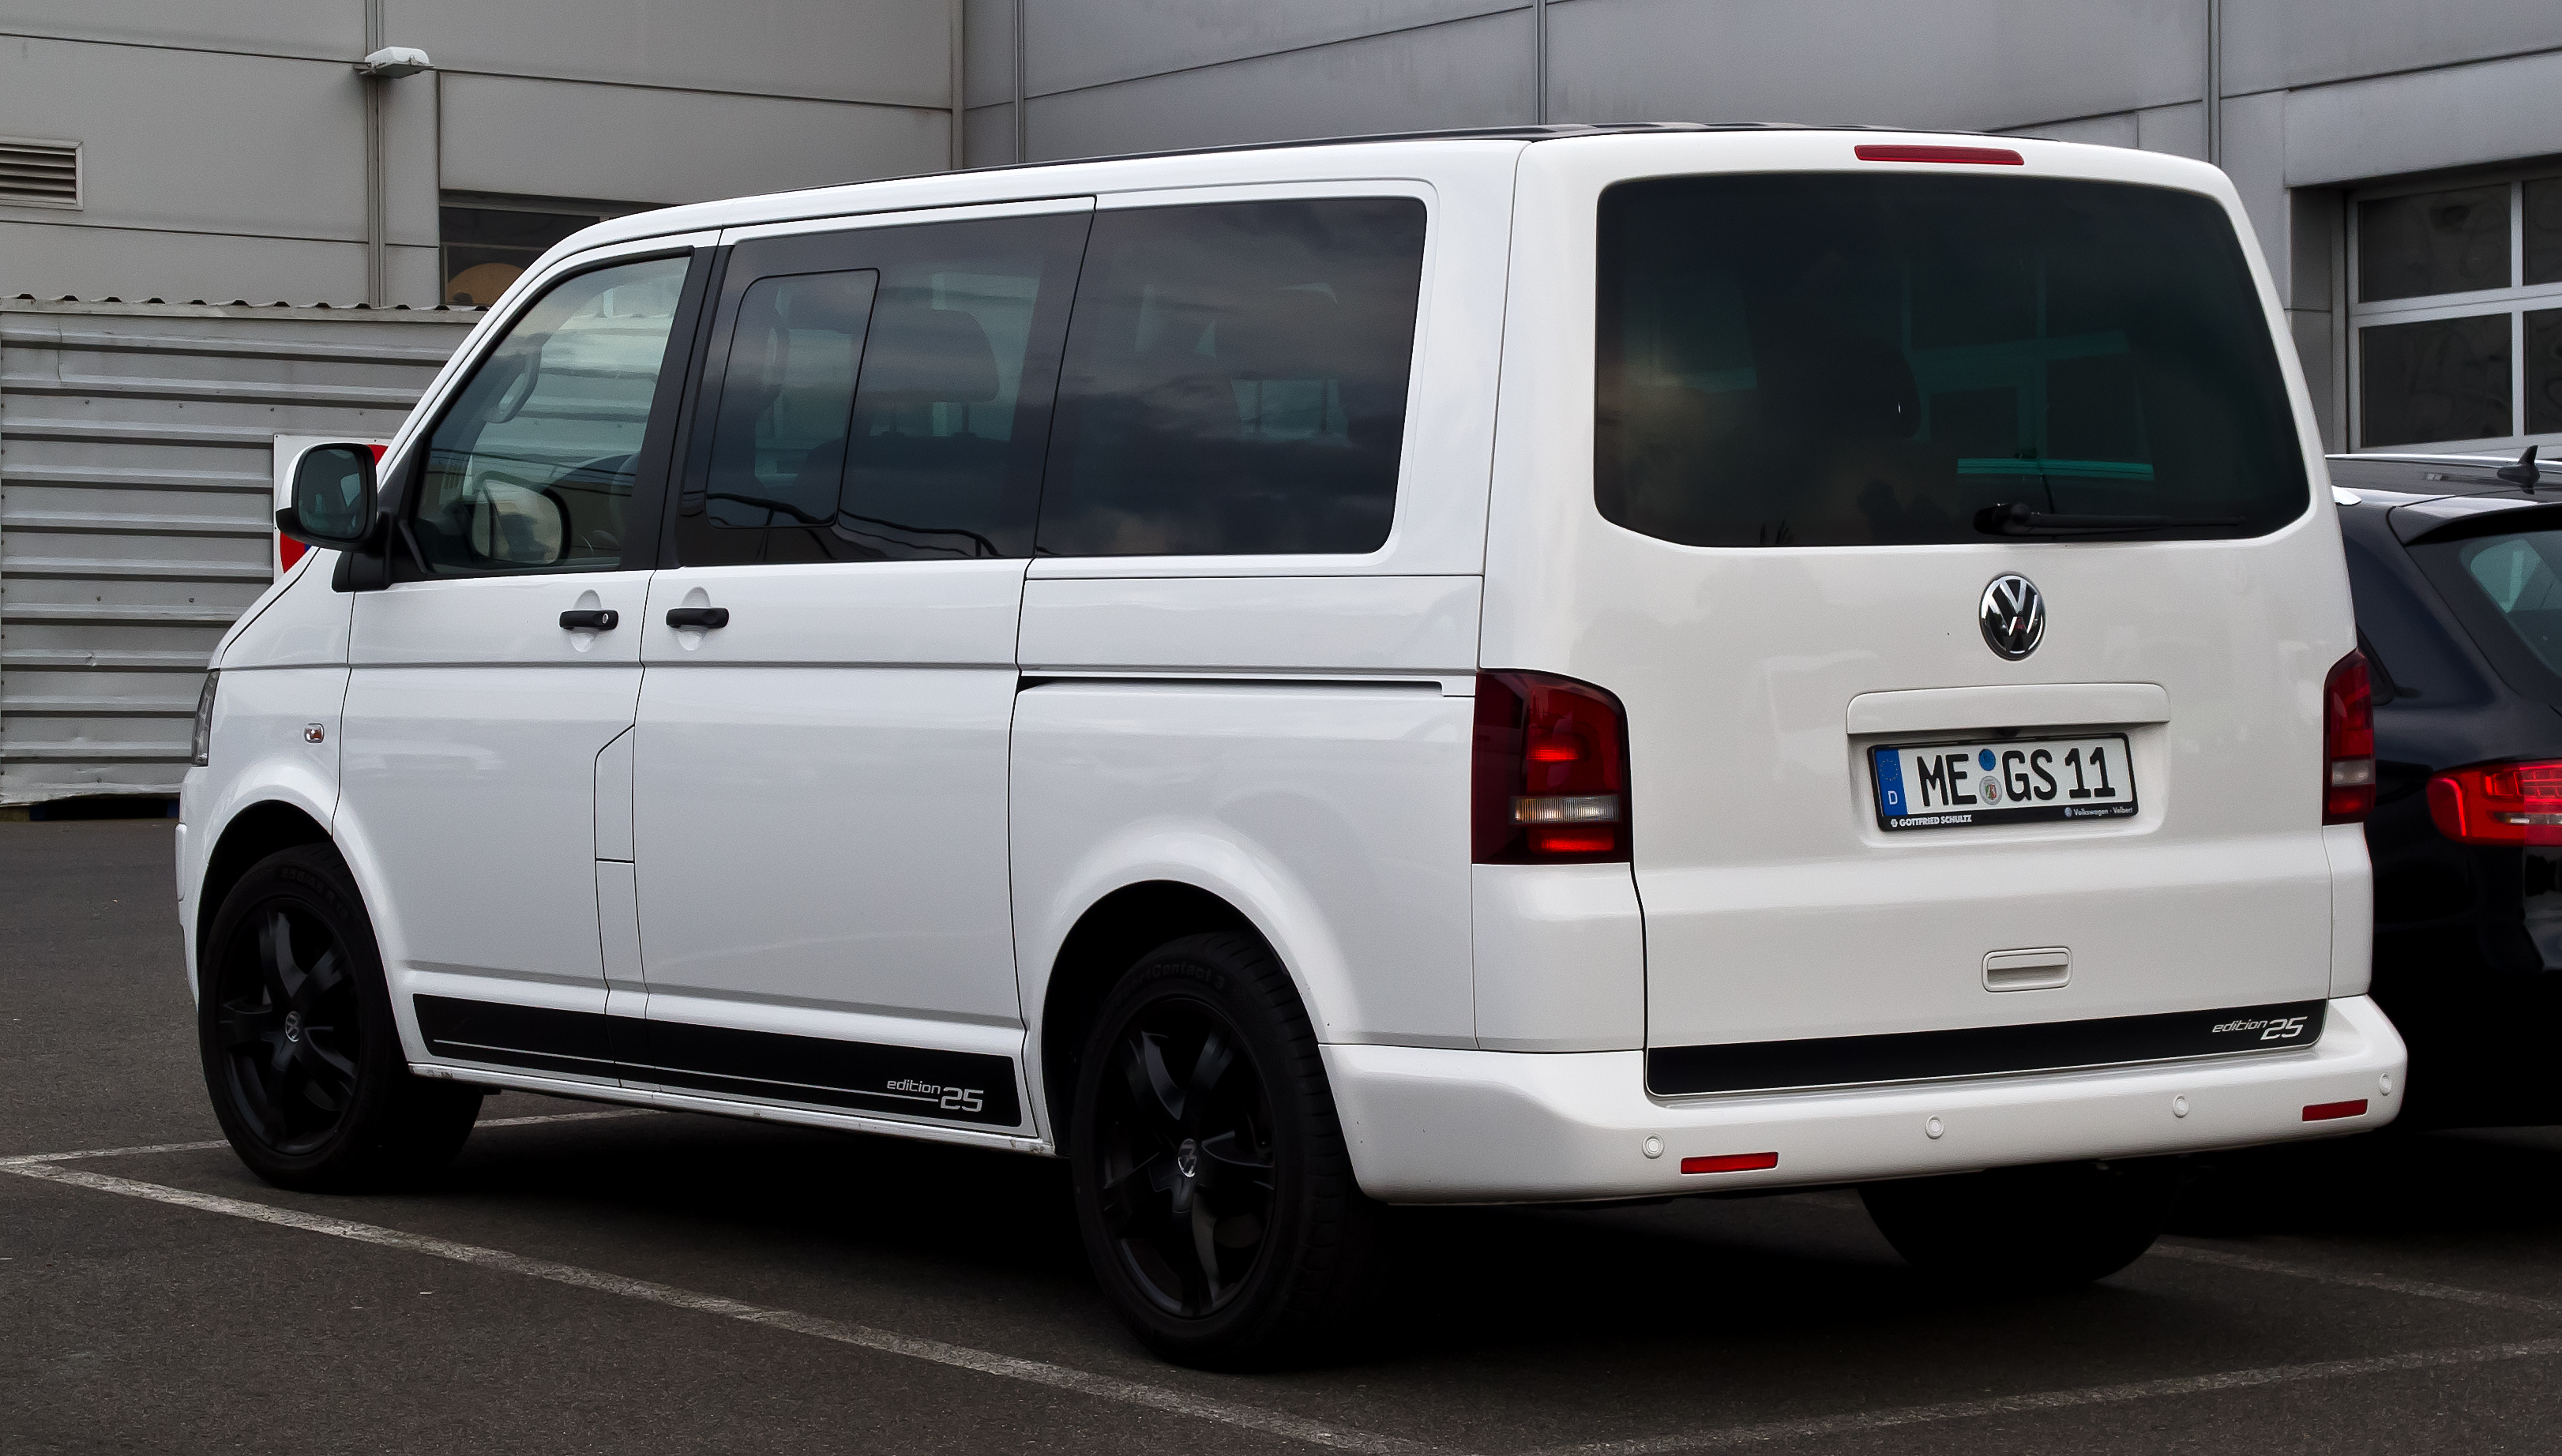 CSB: There's at least one VW T5 Multivan in the USA